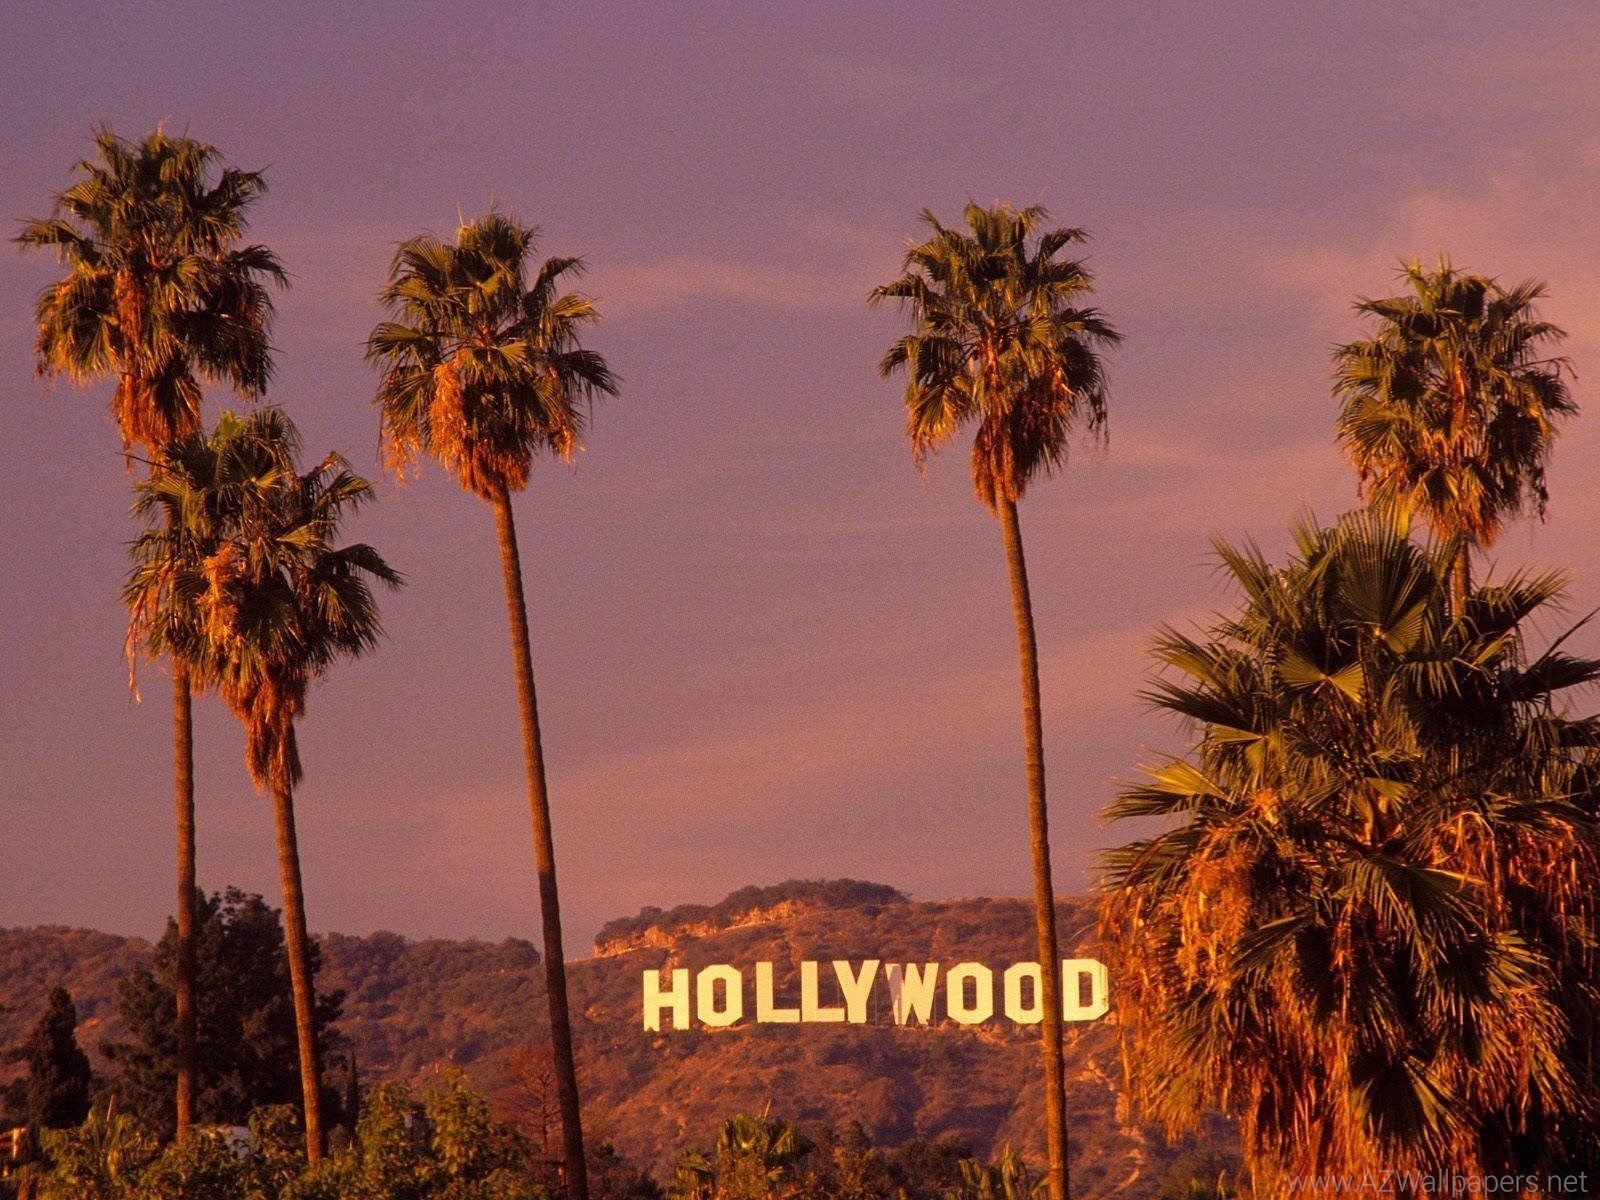 A group of palm trees in front - Los Angeles, California